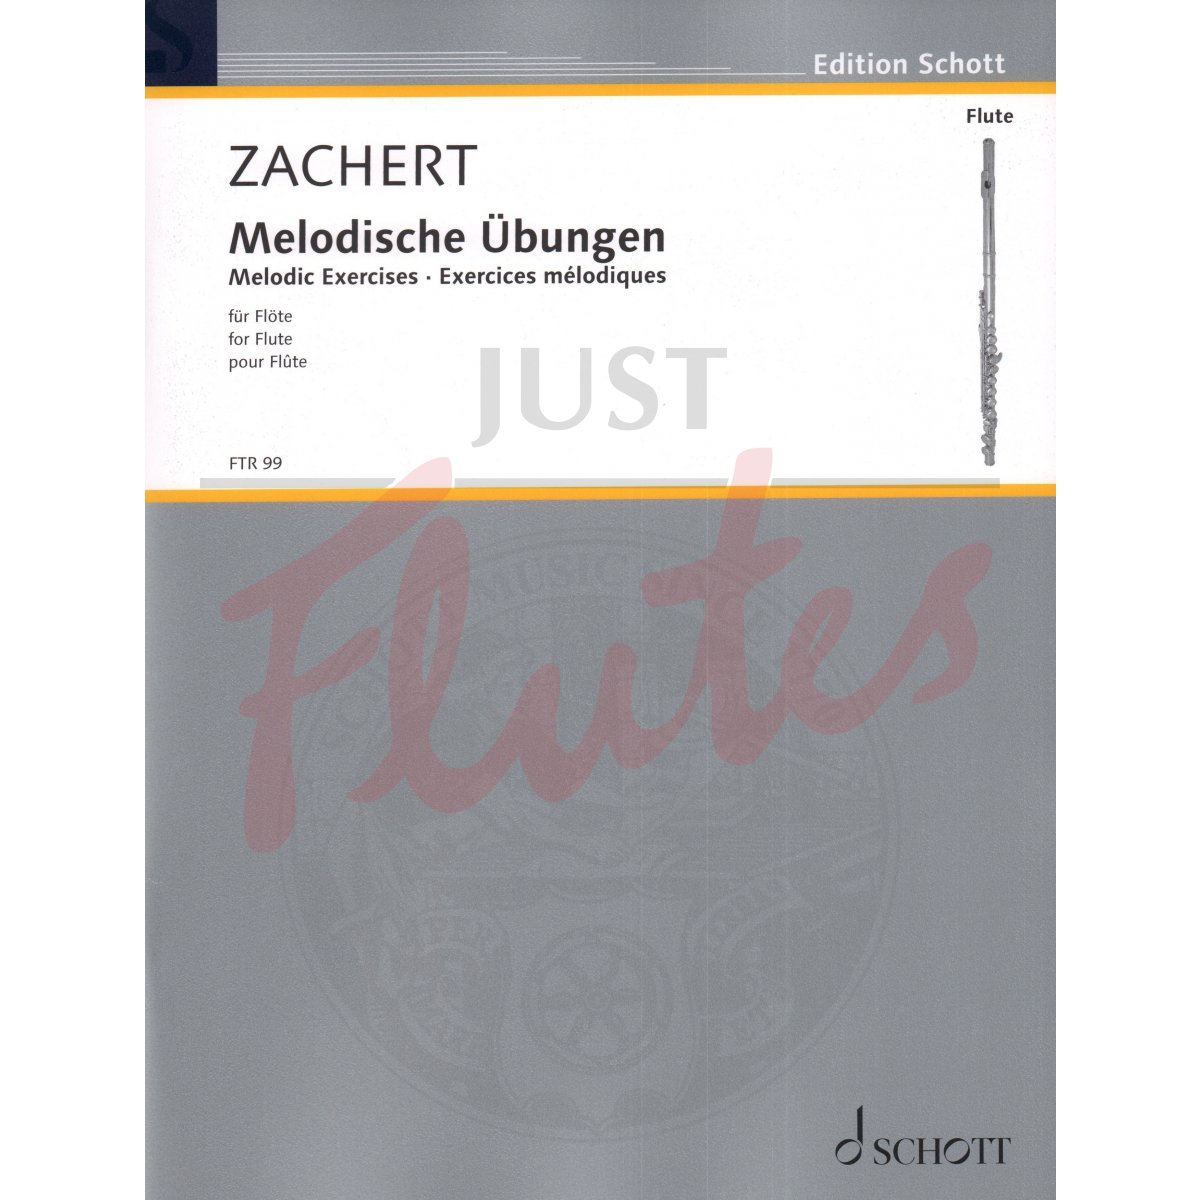 Melodic Exercises for Flute